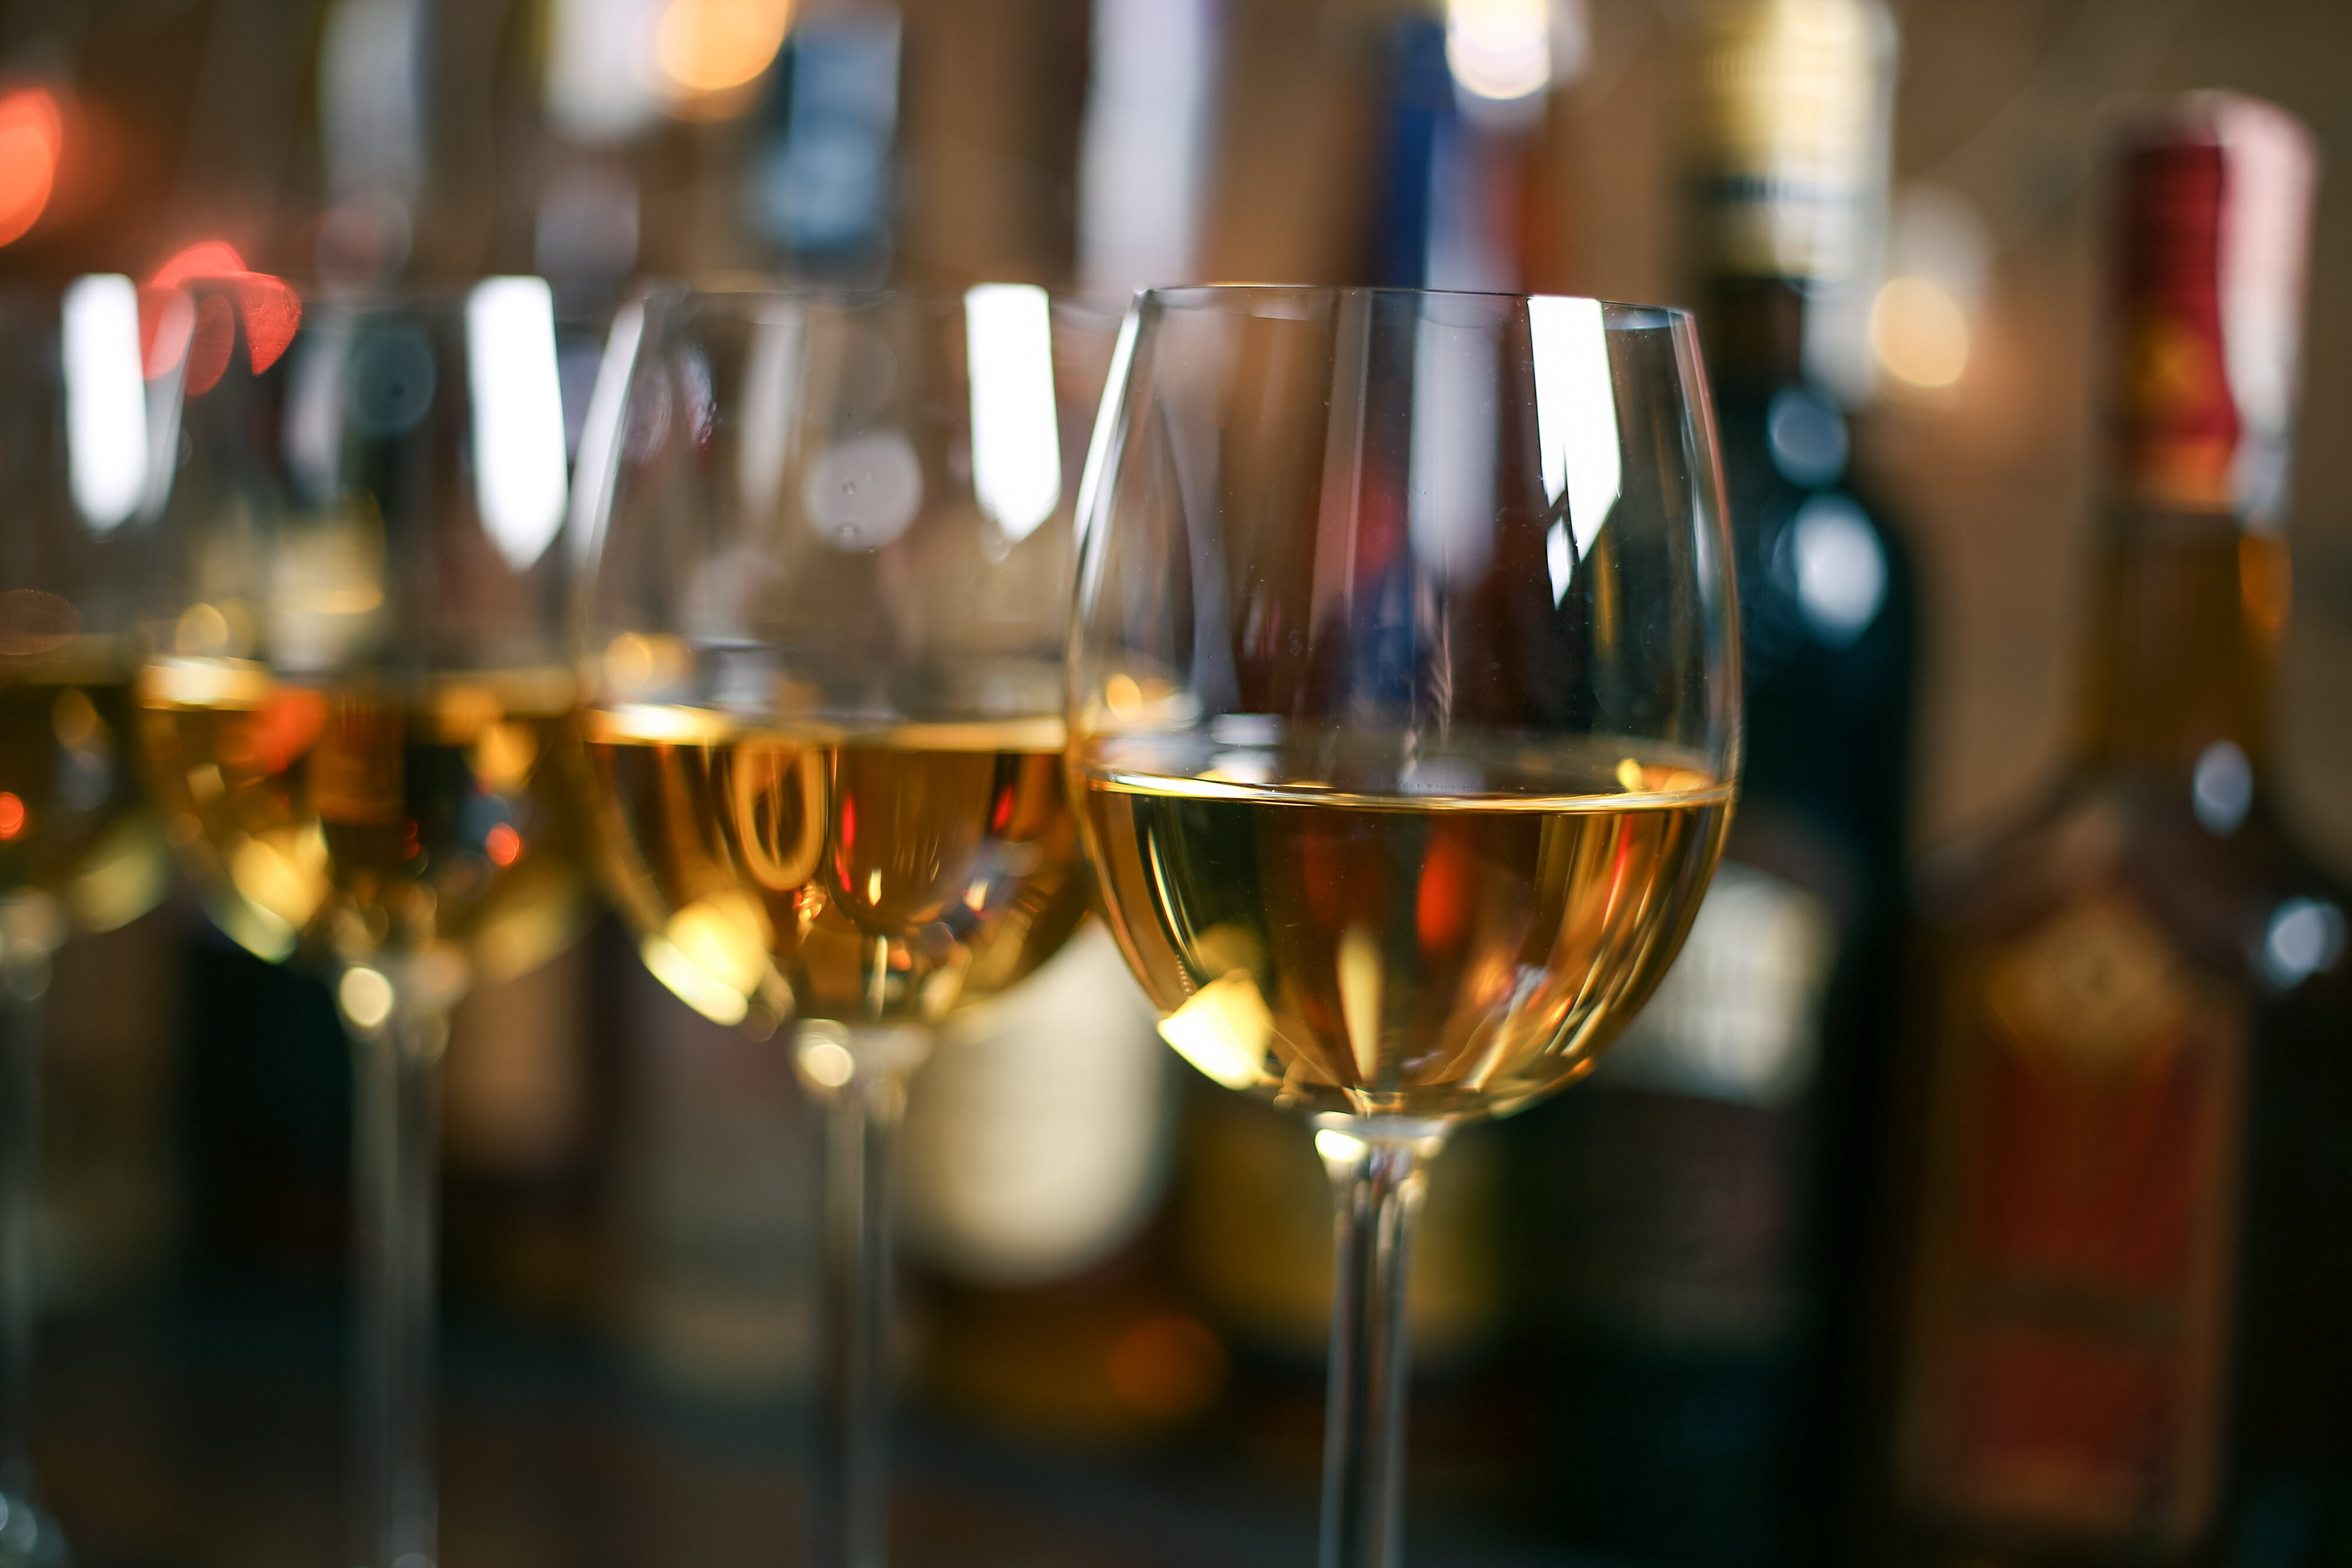 The London Wine Fair announces preview date ahead of sector's reopening